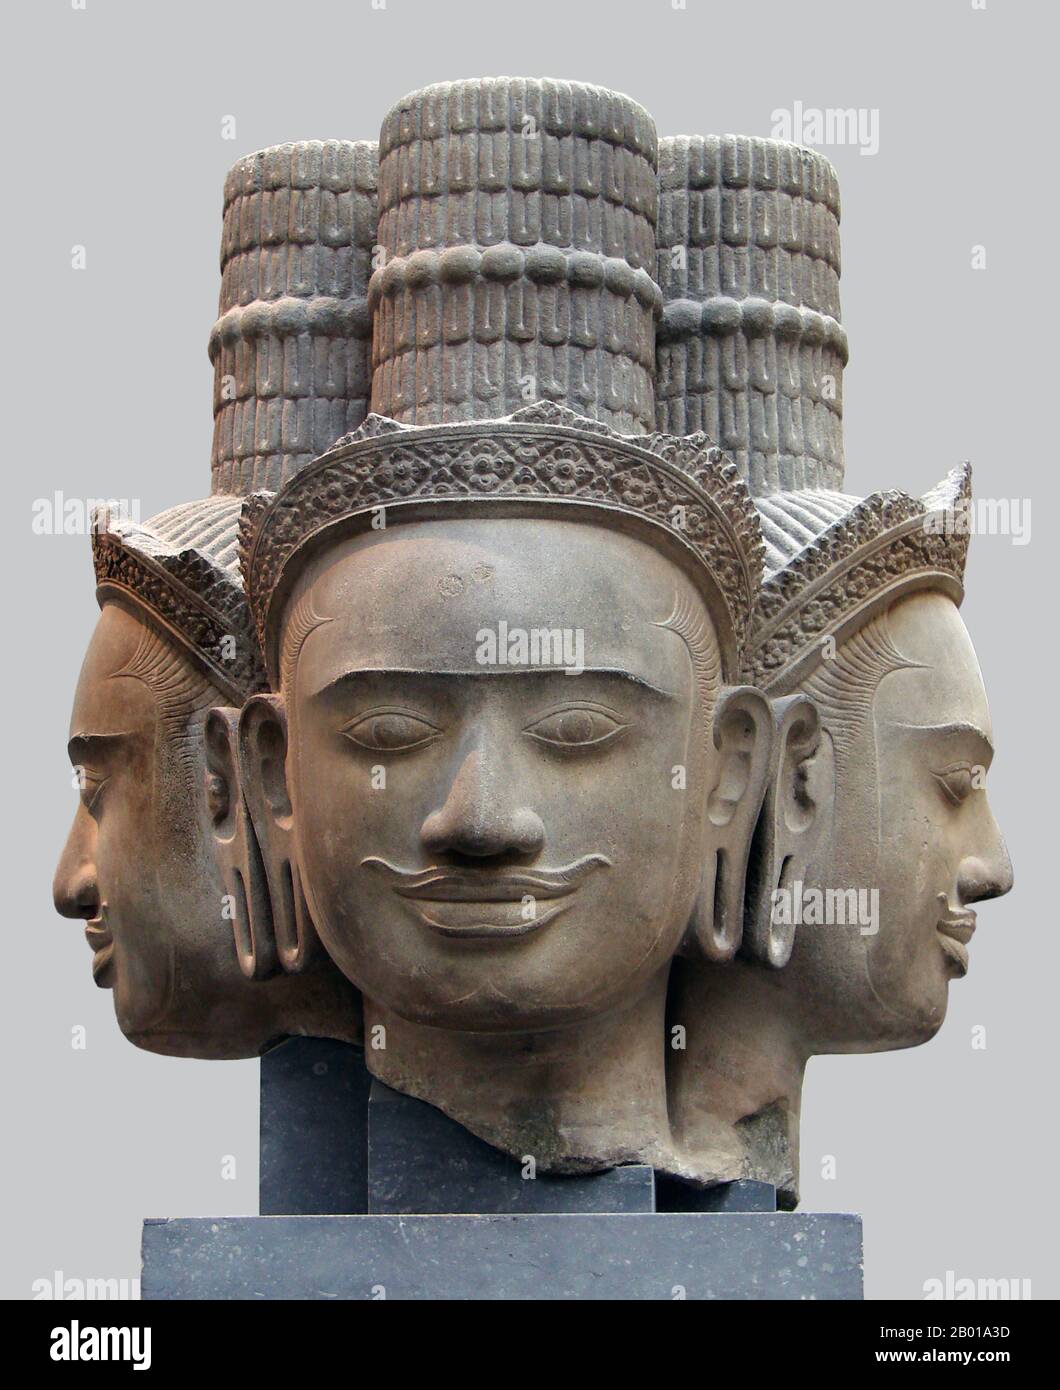 Cambodia: Triple head of Brahma from Phnom Bok, Siem Reap, now in the Musée Guimet, Paris, 9th-10th century.  Phnom Bok is a hill in the northeast of the East Baray in Cambodia, with a prasat (temple) of the same name built on it. It is one of a 'trilogy of mountains', each of which has a temple with similar layout. The creation of the temple is credited to the reign of Yasovarman I (889–910) between the 9th and 10th centuries and was established after he moved his capital to Angkor and named it Yasodharapura. The two other sister temples are Phnom Bakheng and Phnom Krom. Stock Photo